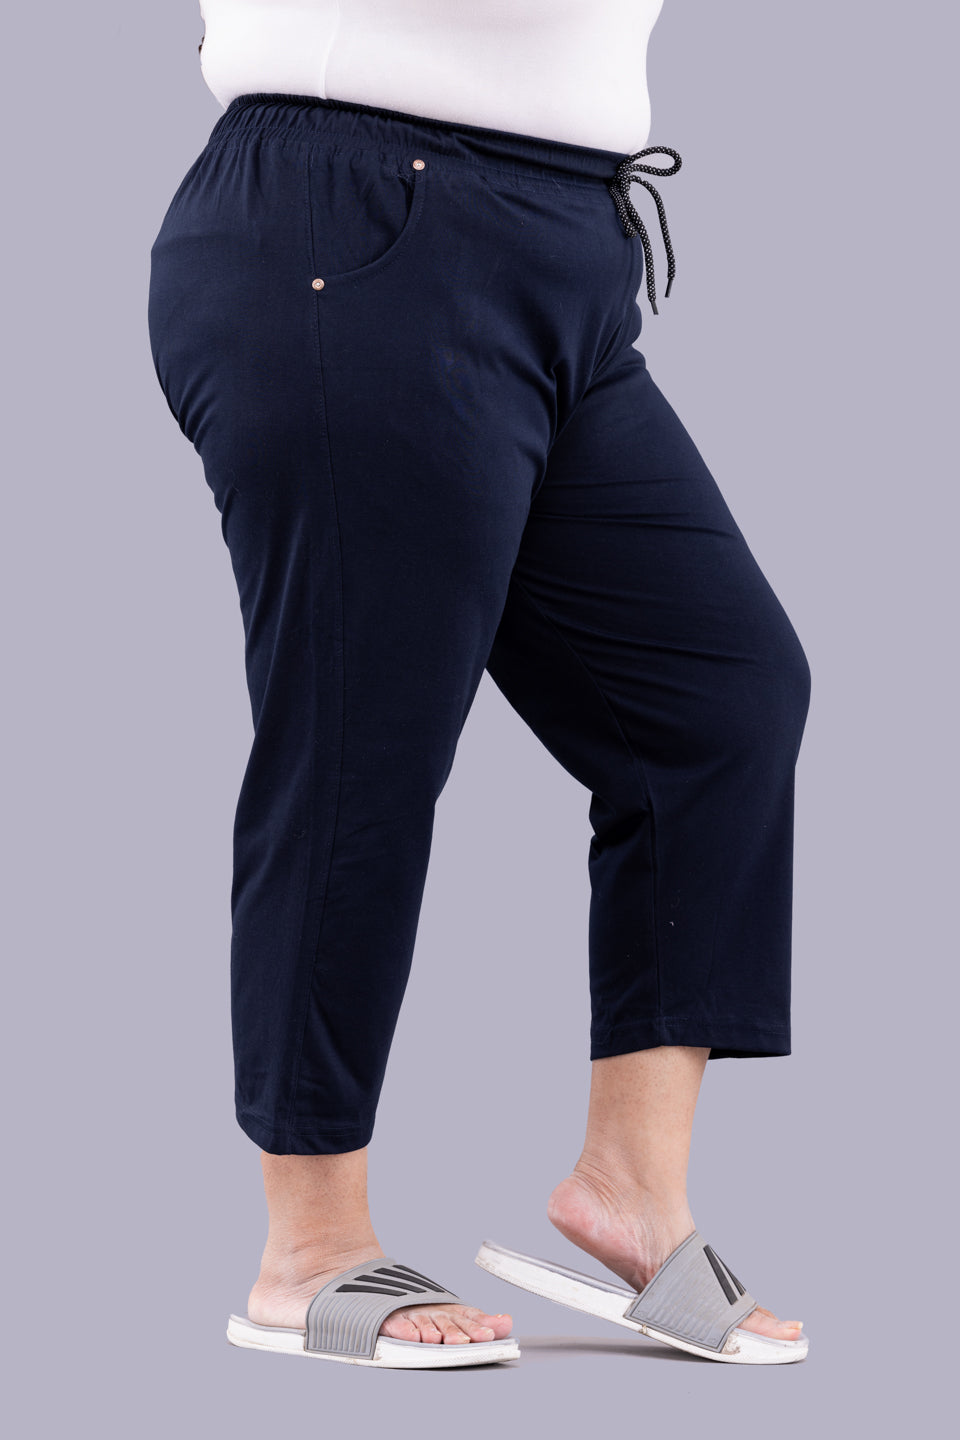 Stylish Navy Blue Cotton Half Capris For Women online in India